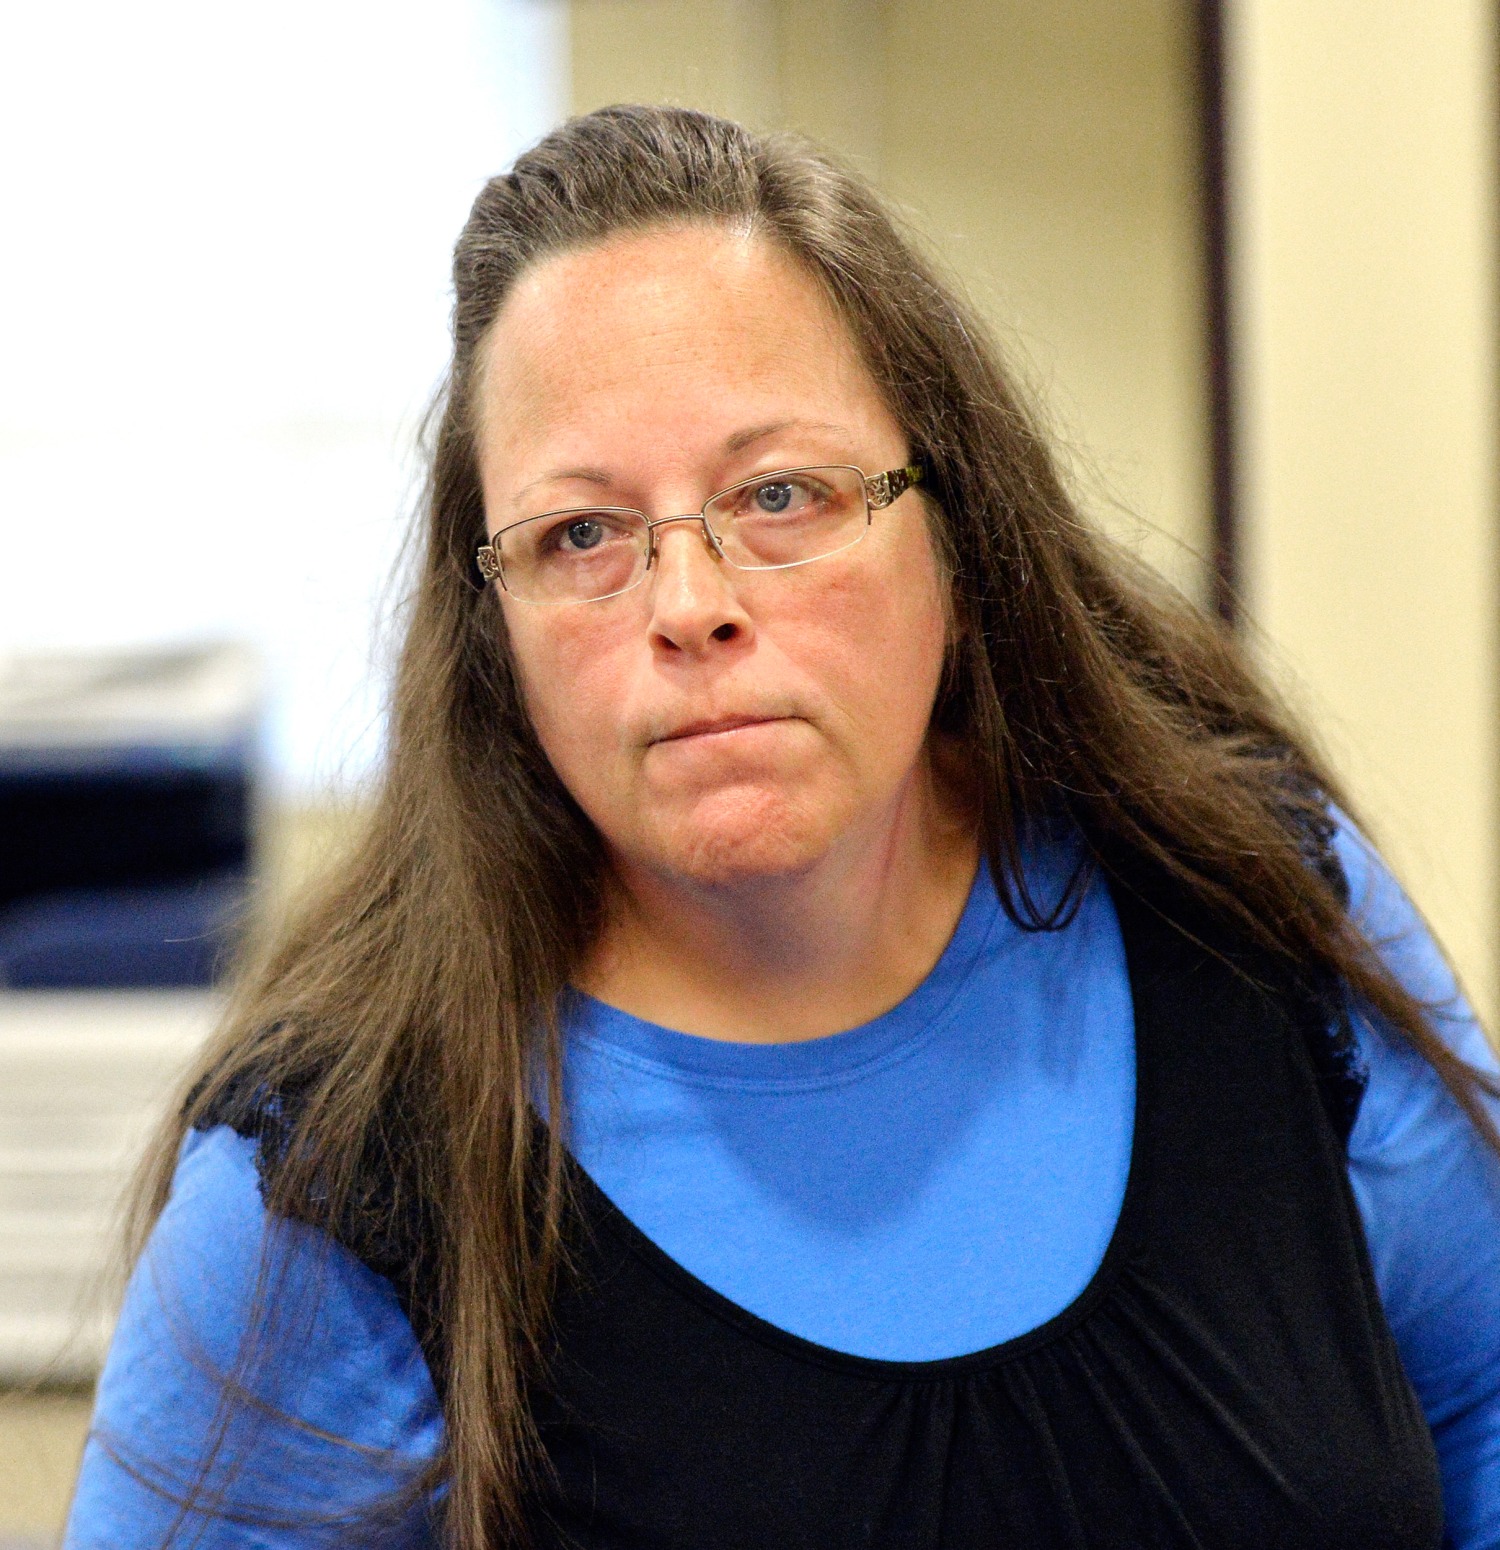 Kentucky Clerk Kim Davis, Who Refused to Issue Marriage Licenses to Gays, Seeks to End Case